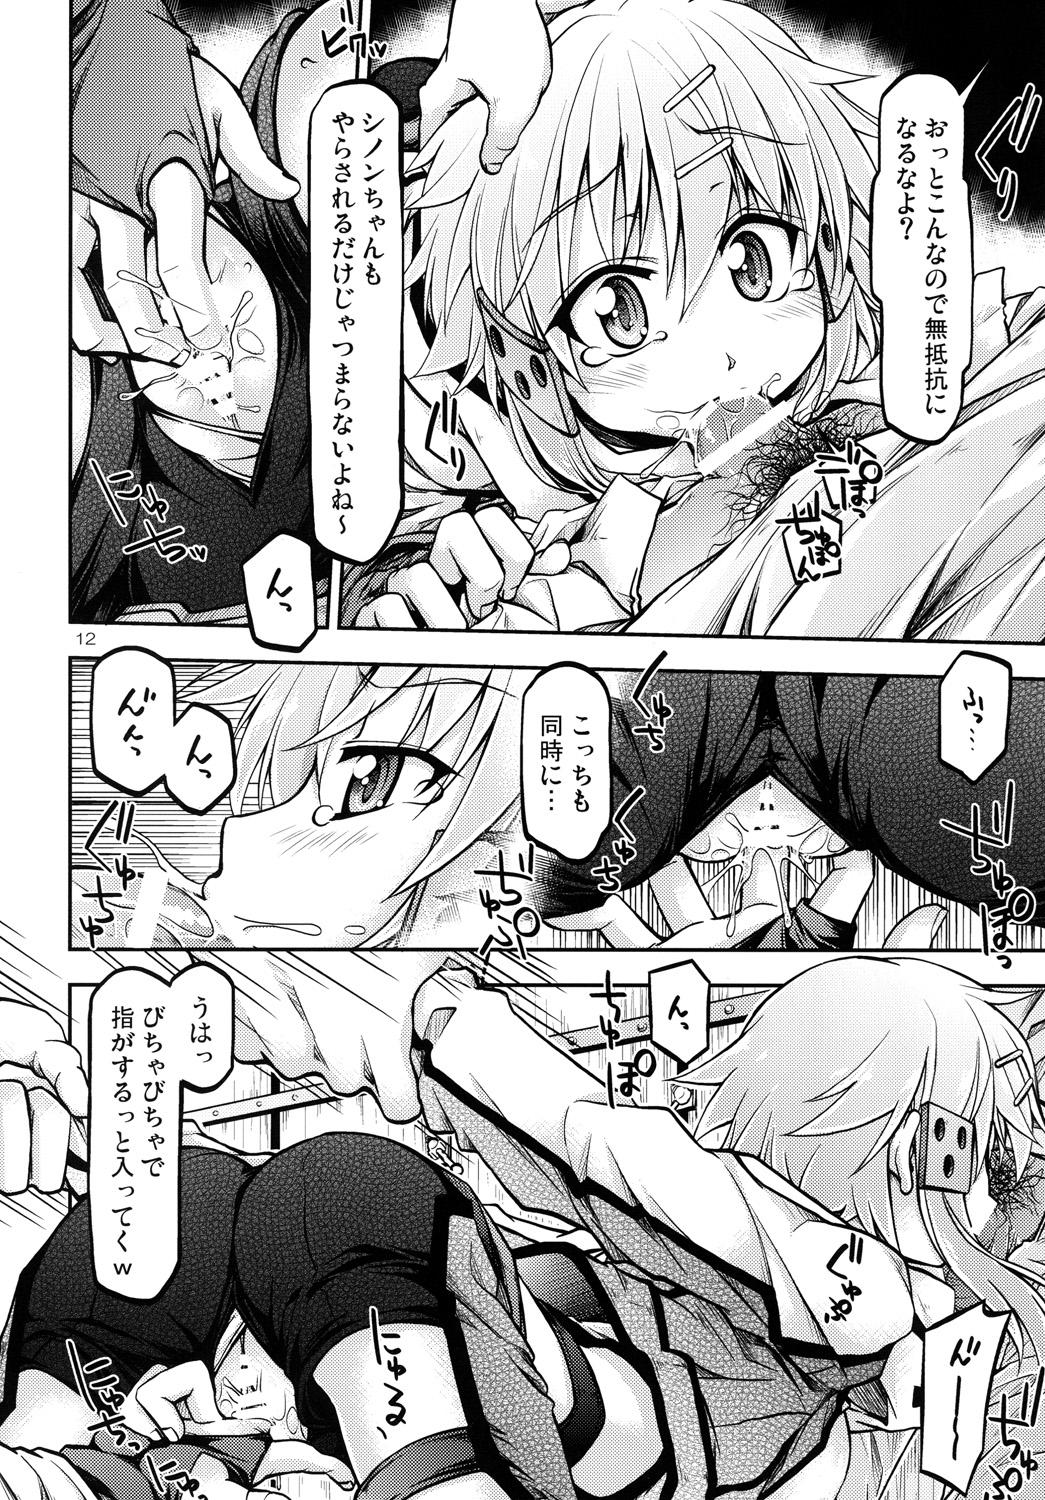 Rimming Gspot - Sword art online Leche - Page 11